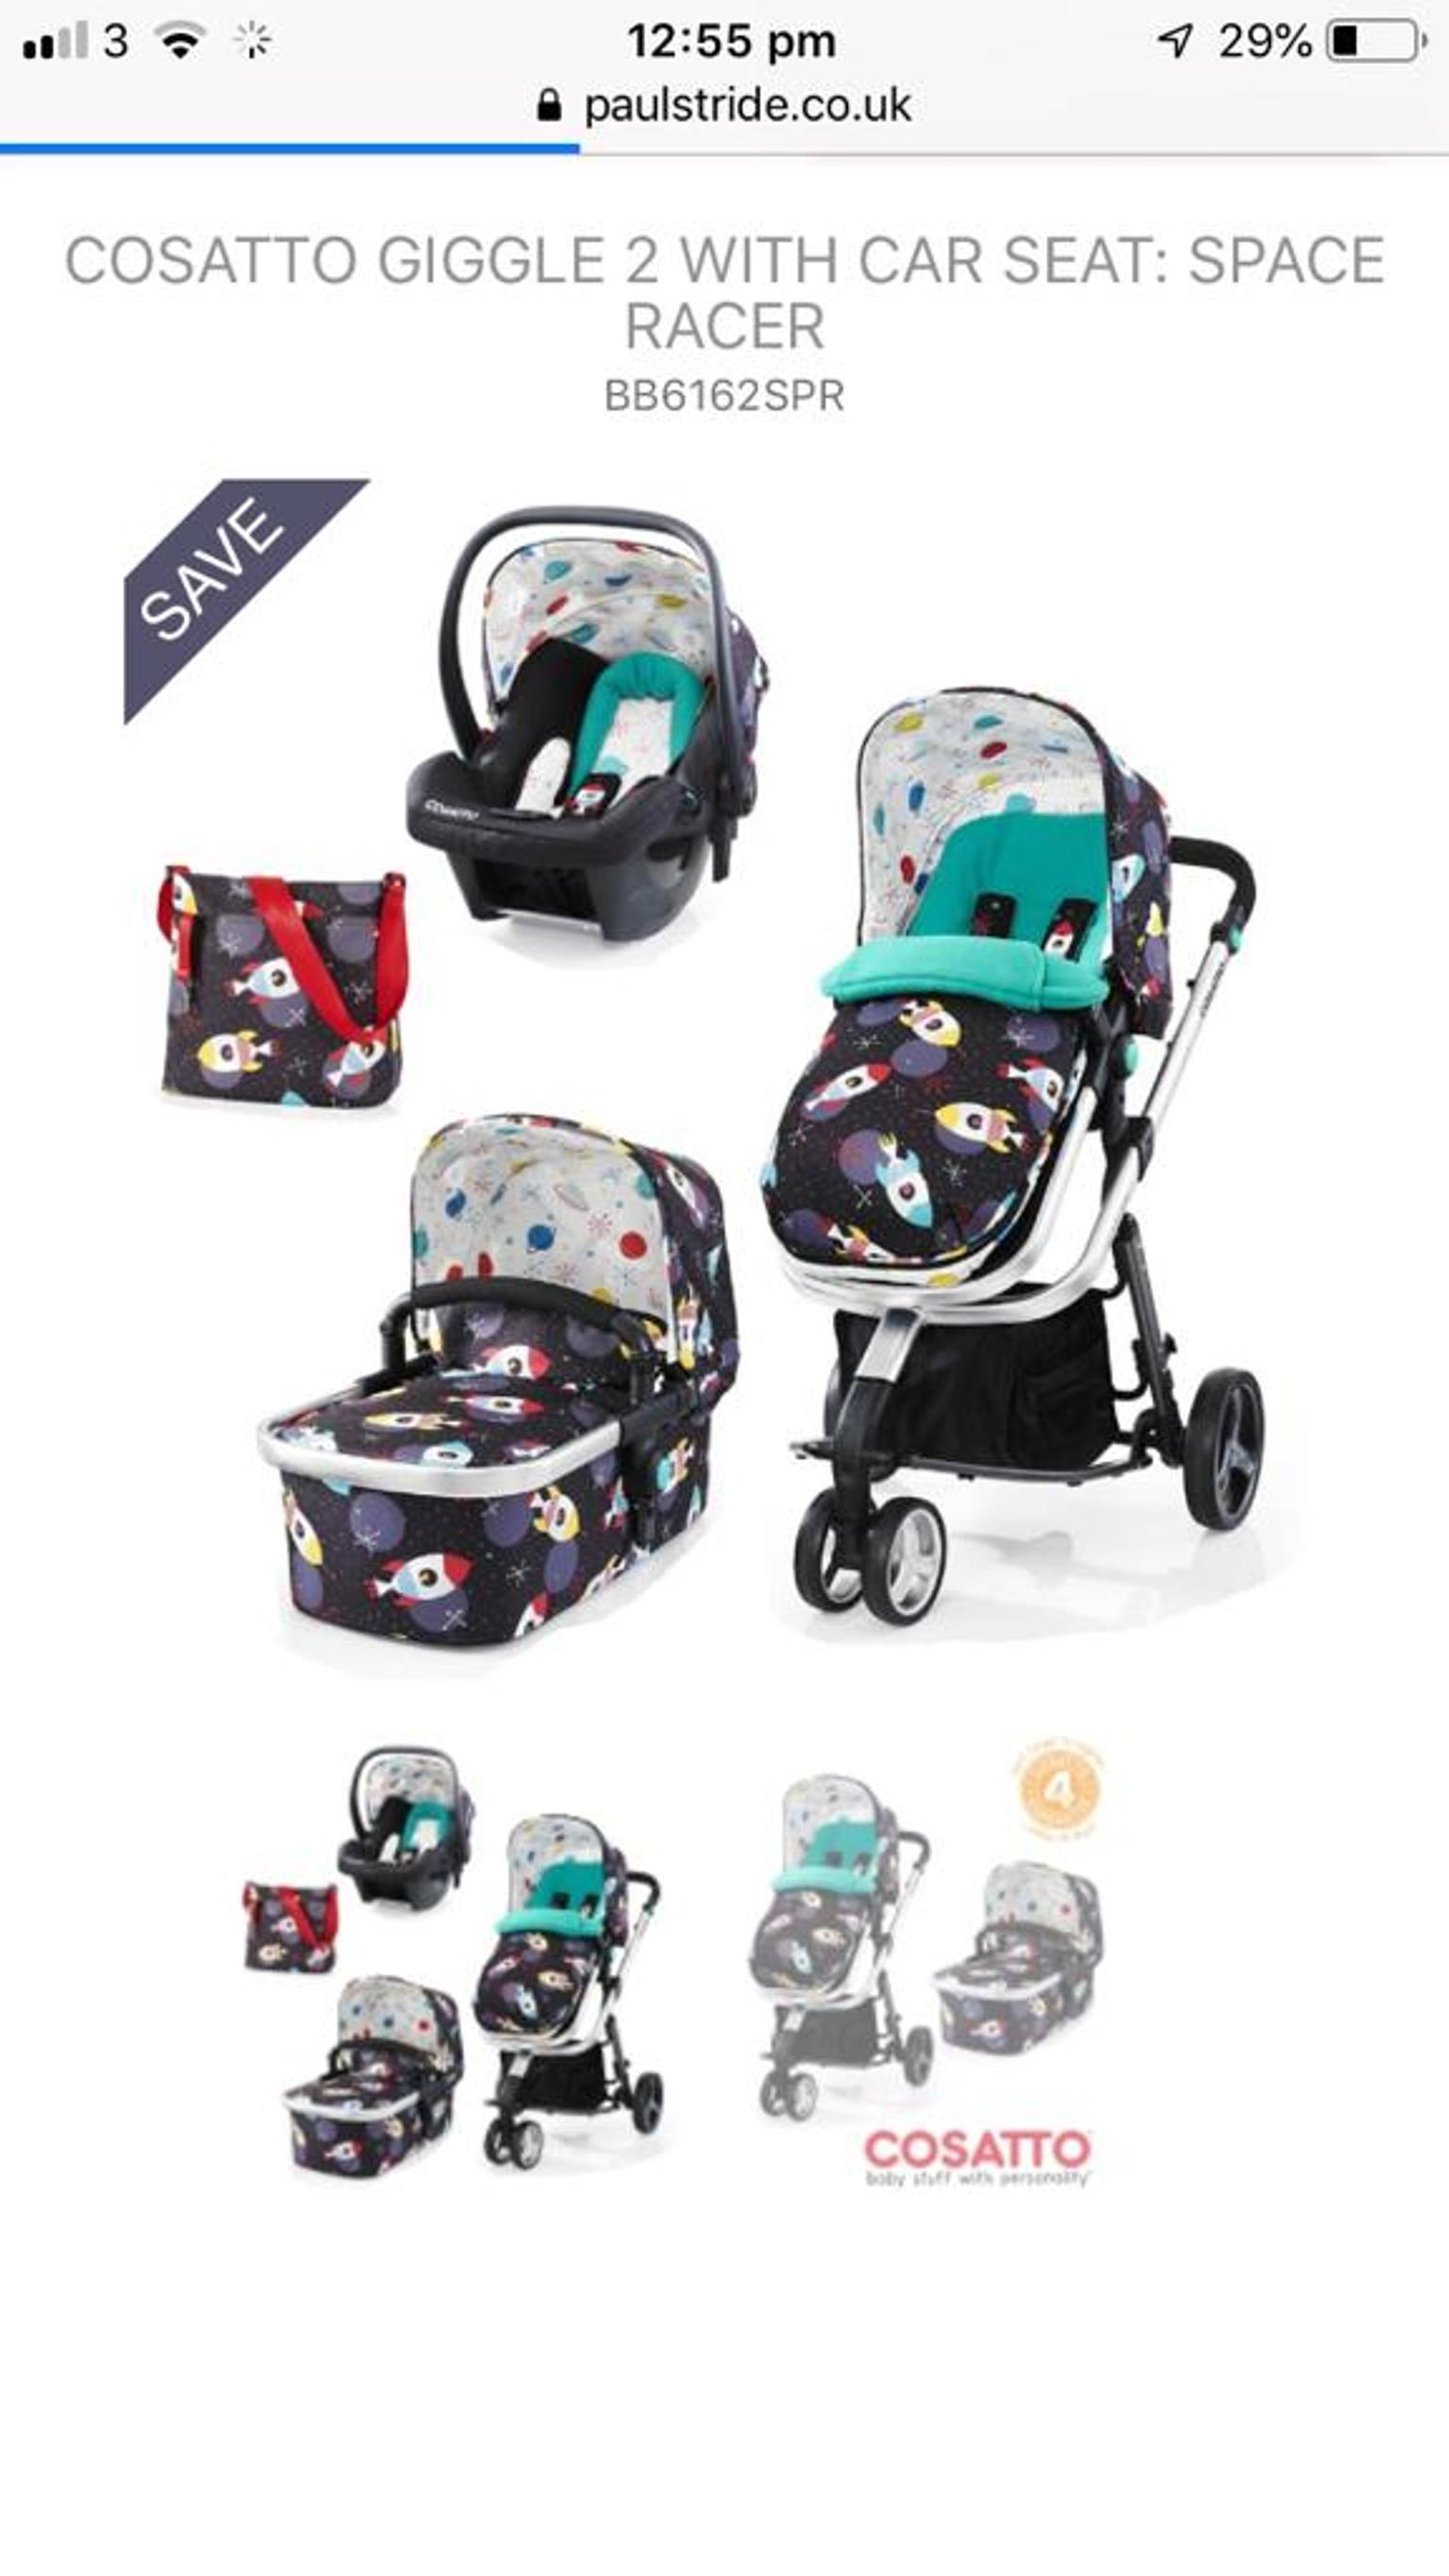 cosatto space racer stroller